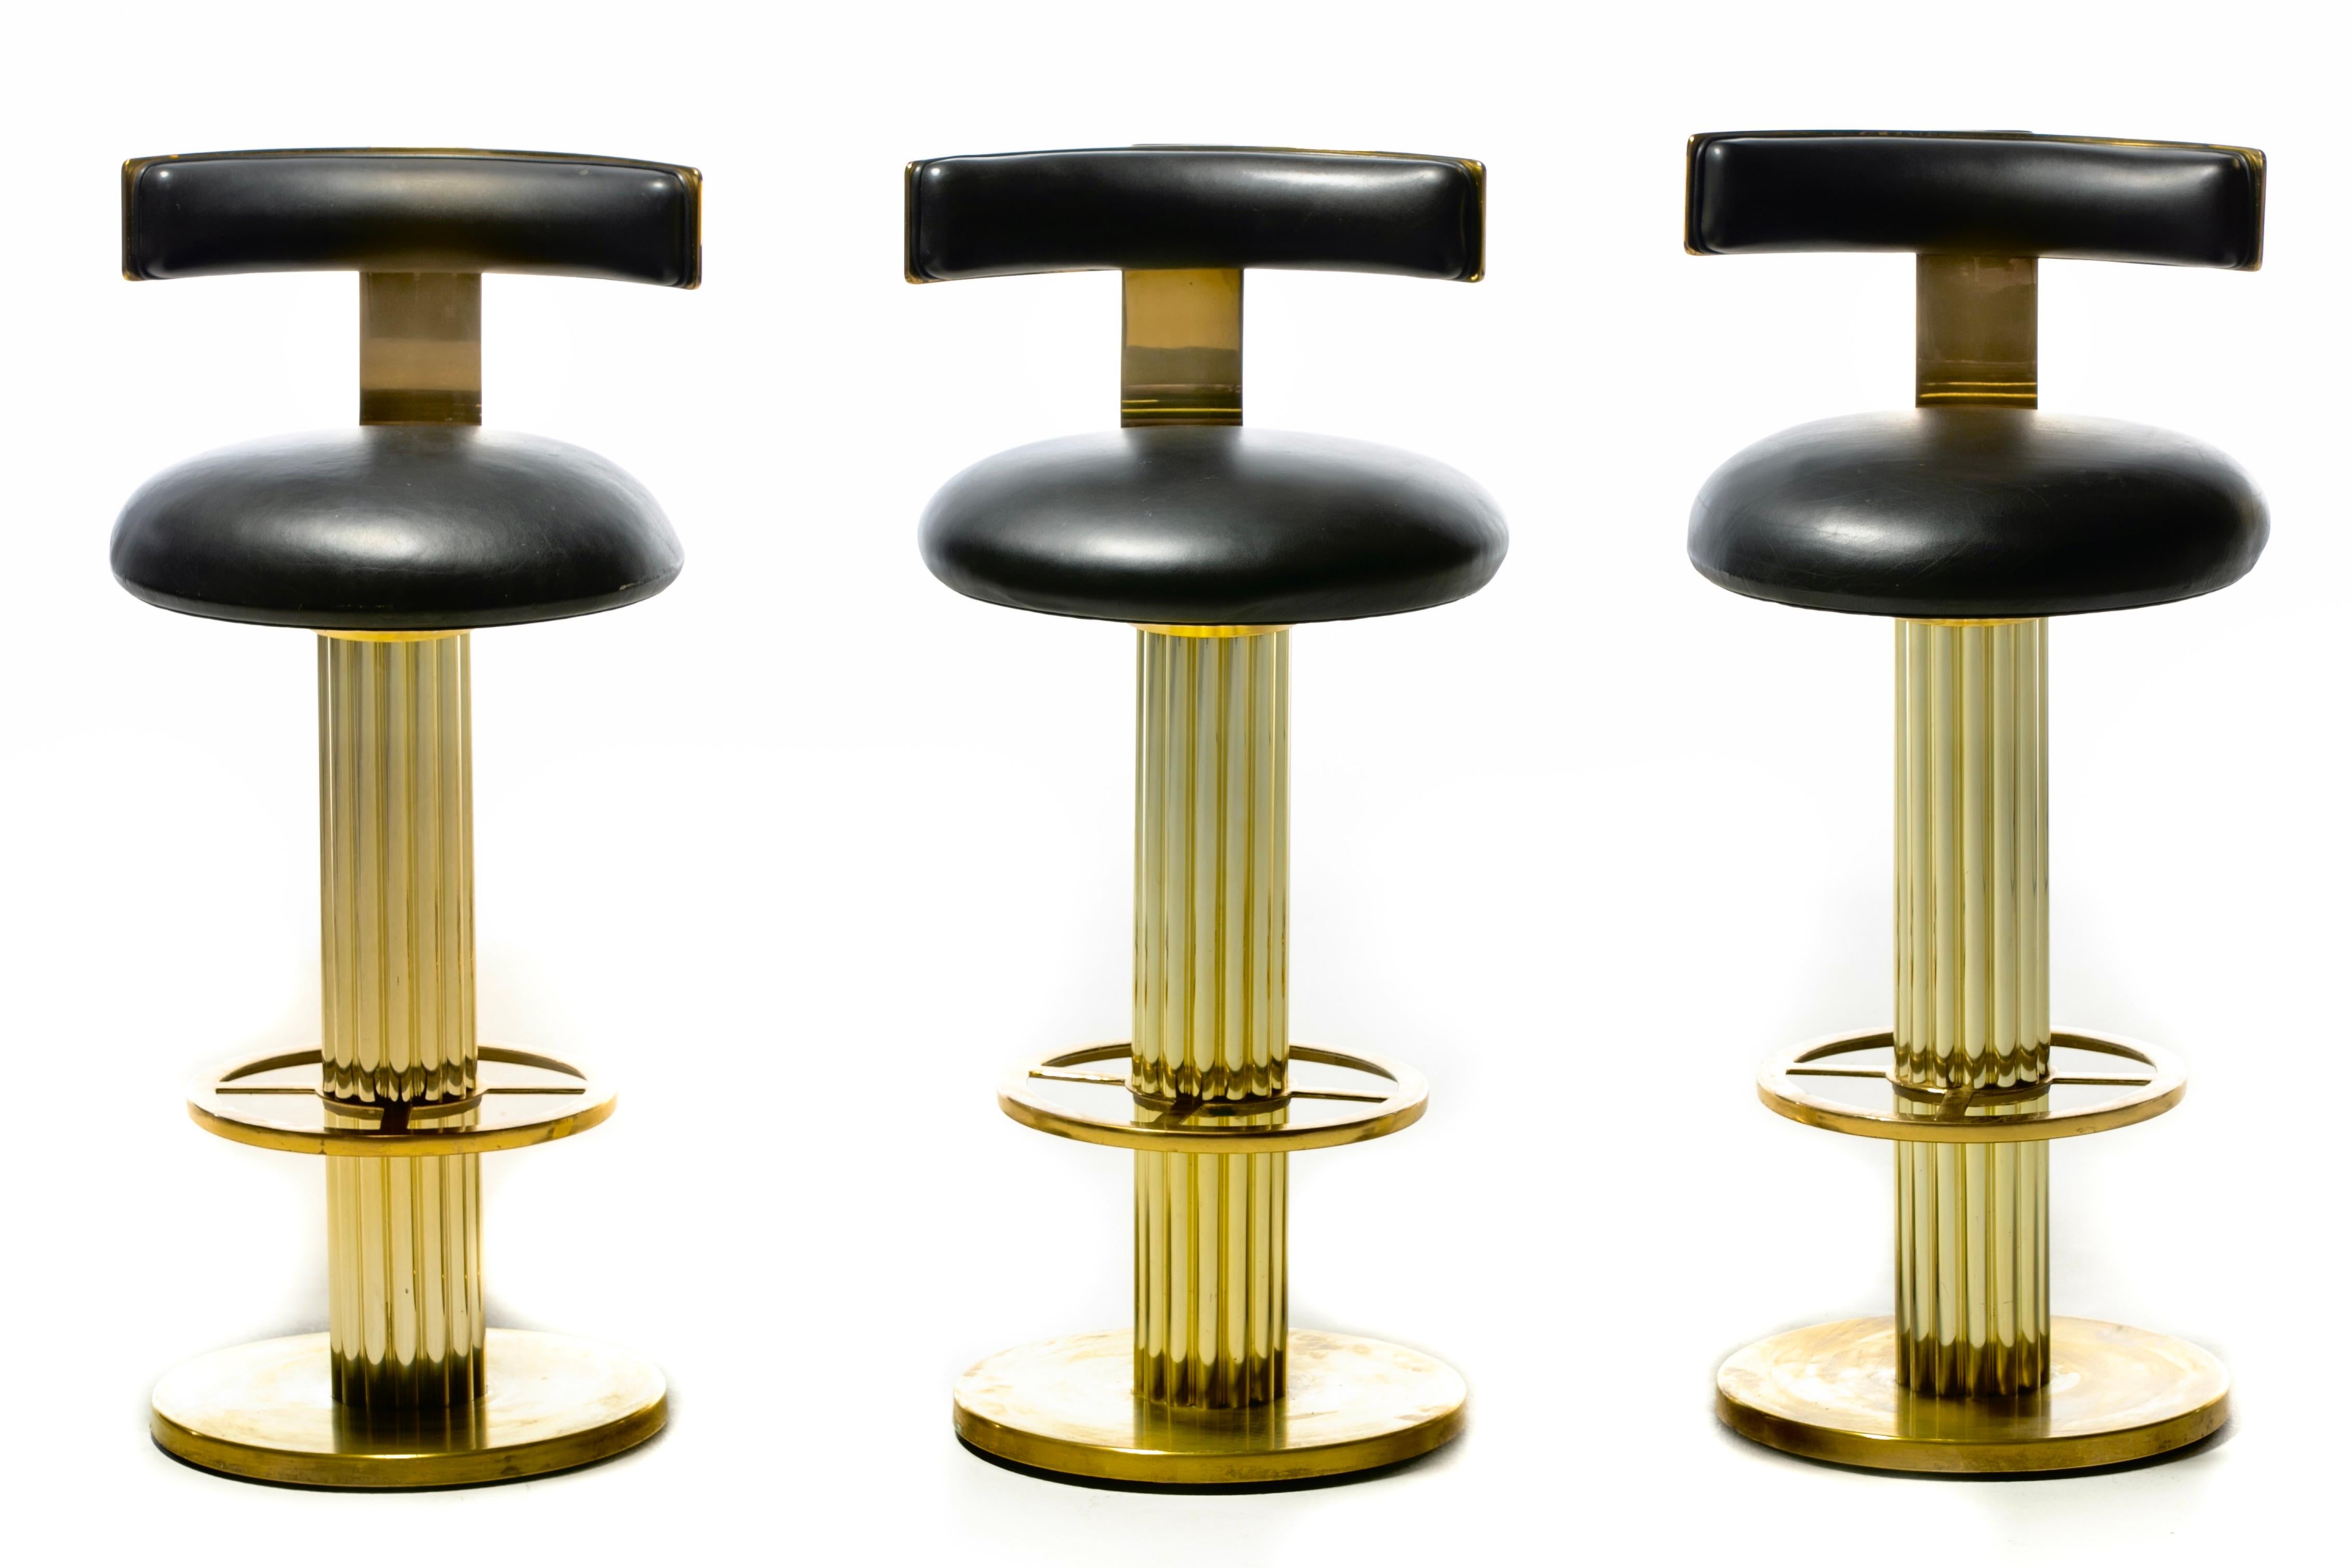 Brushed Post Modern Brass Swivel Bar Stools by Design for Leisure c. 1980